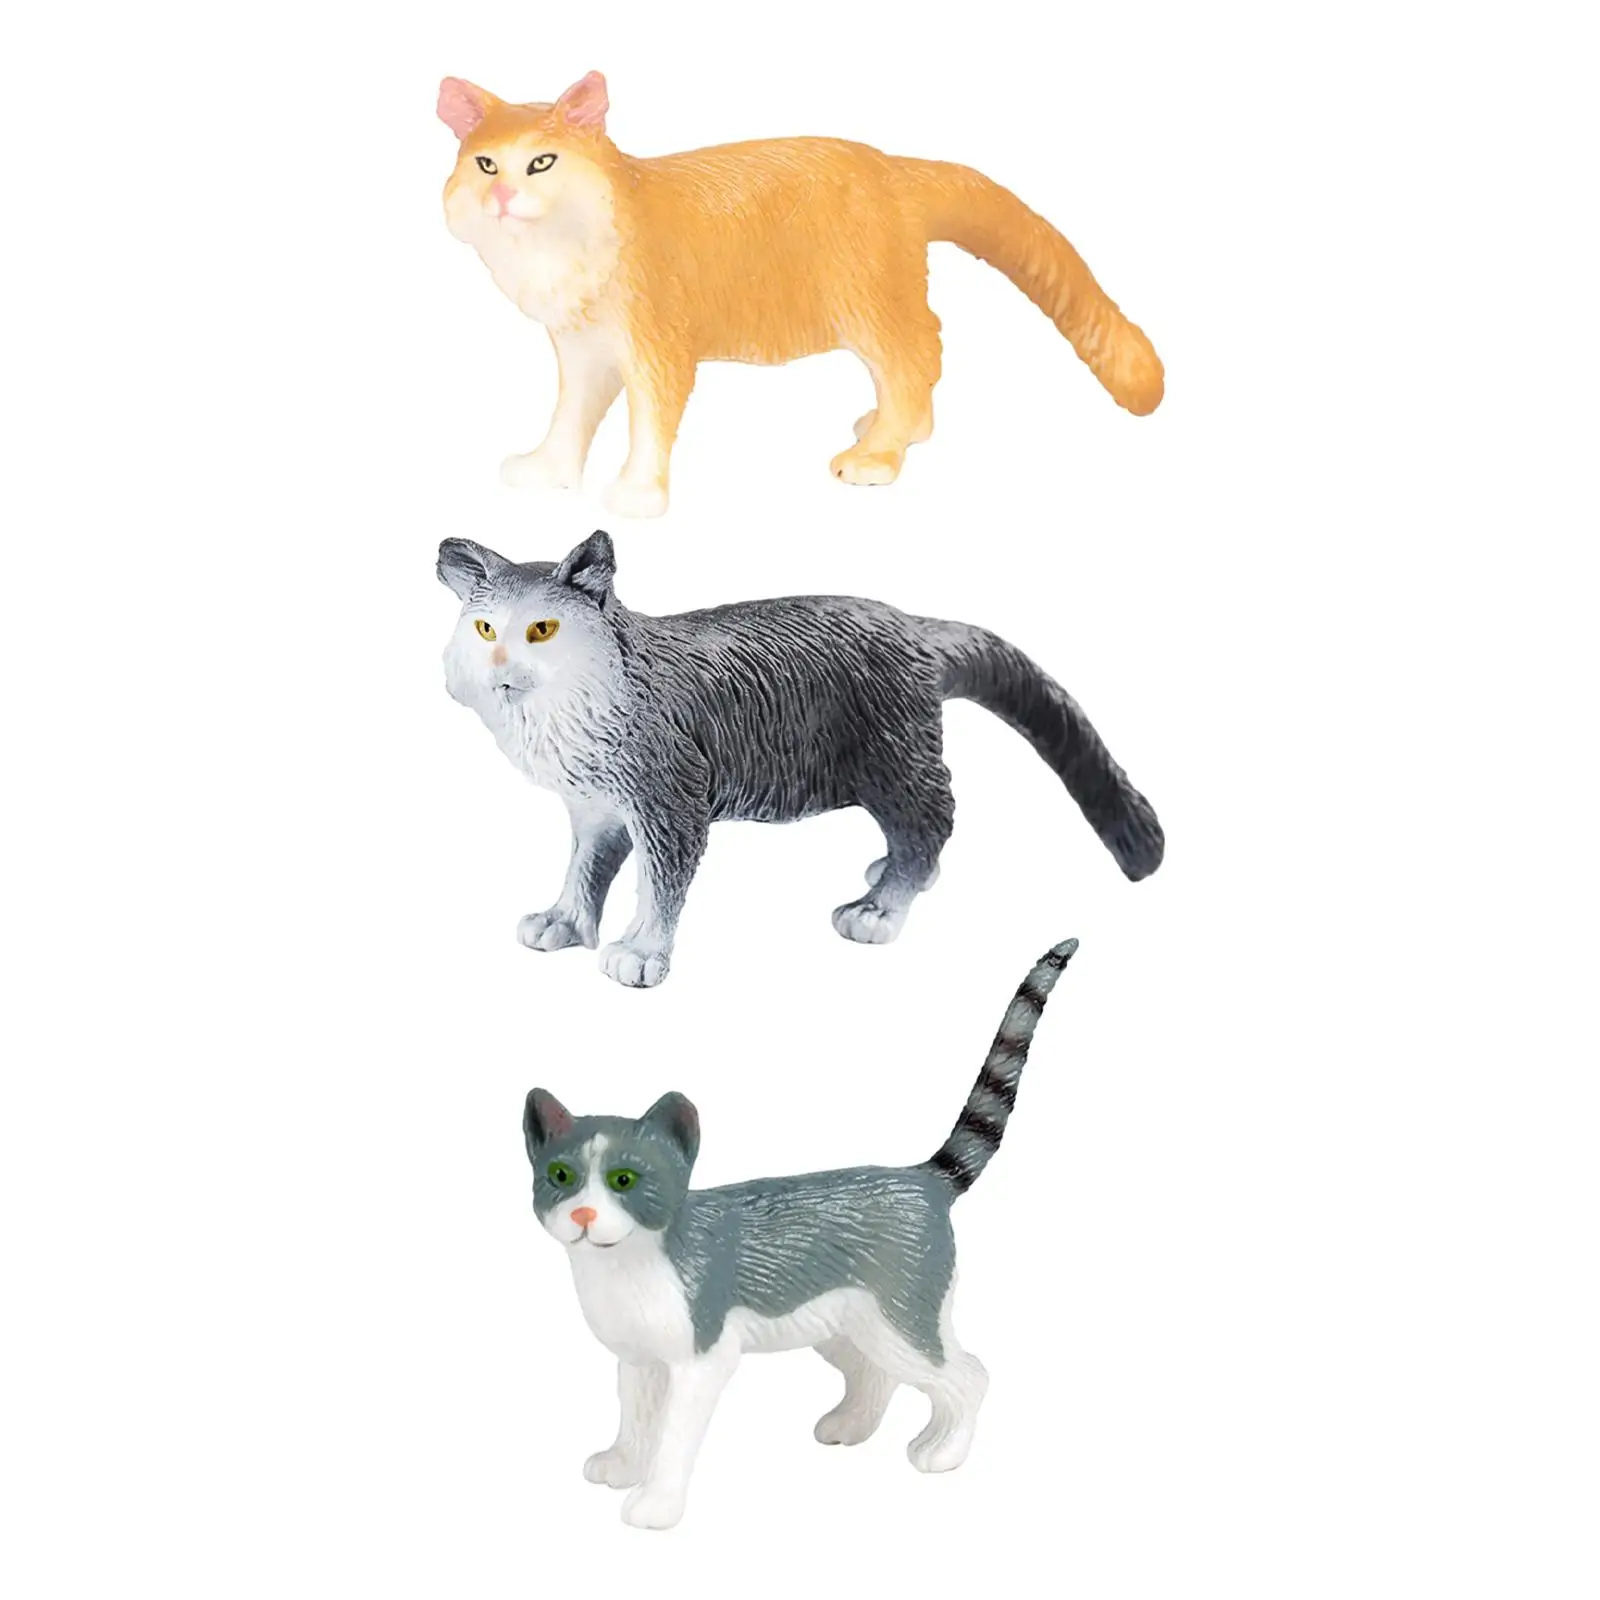 Simulation Animals Figures Small Cat Figures Toy Simulation Cat Ornaments for Party Favor Cake Topper Home Decor Birthday Gift